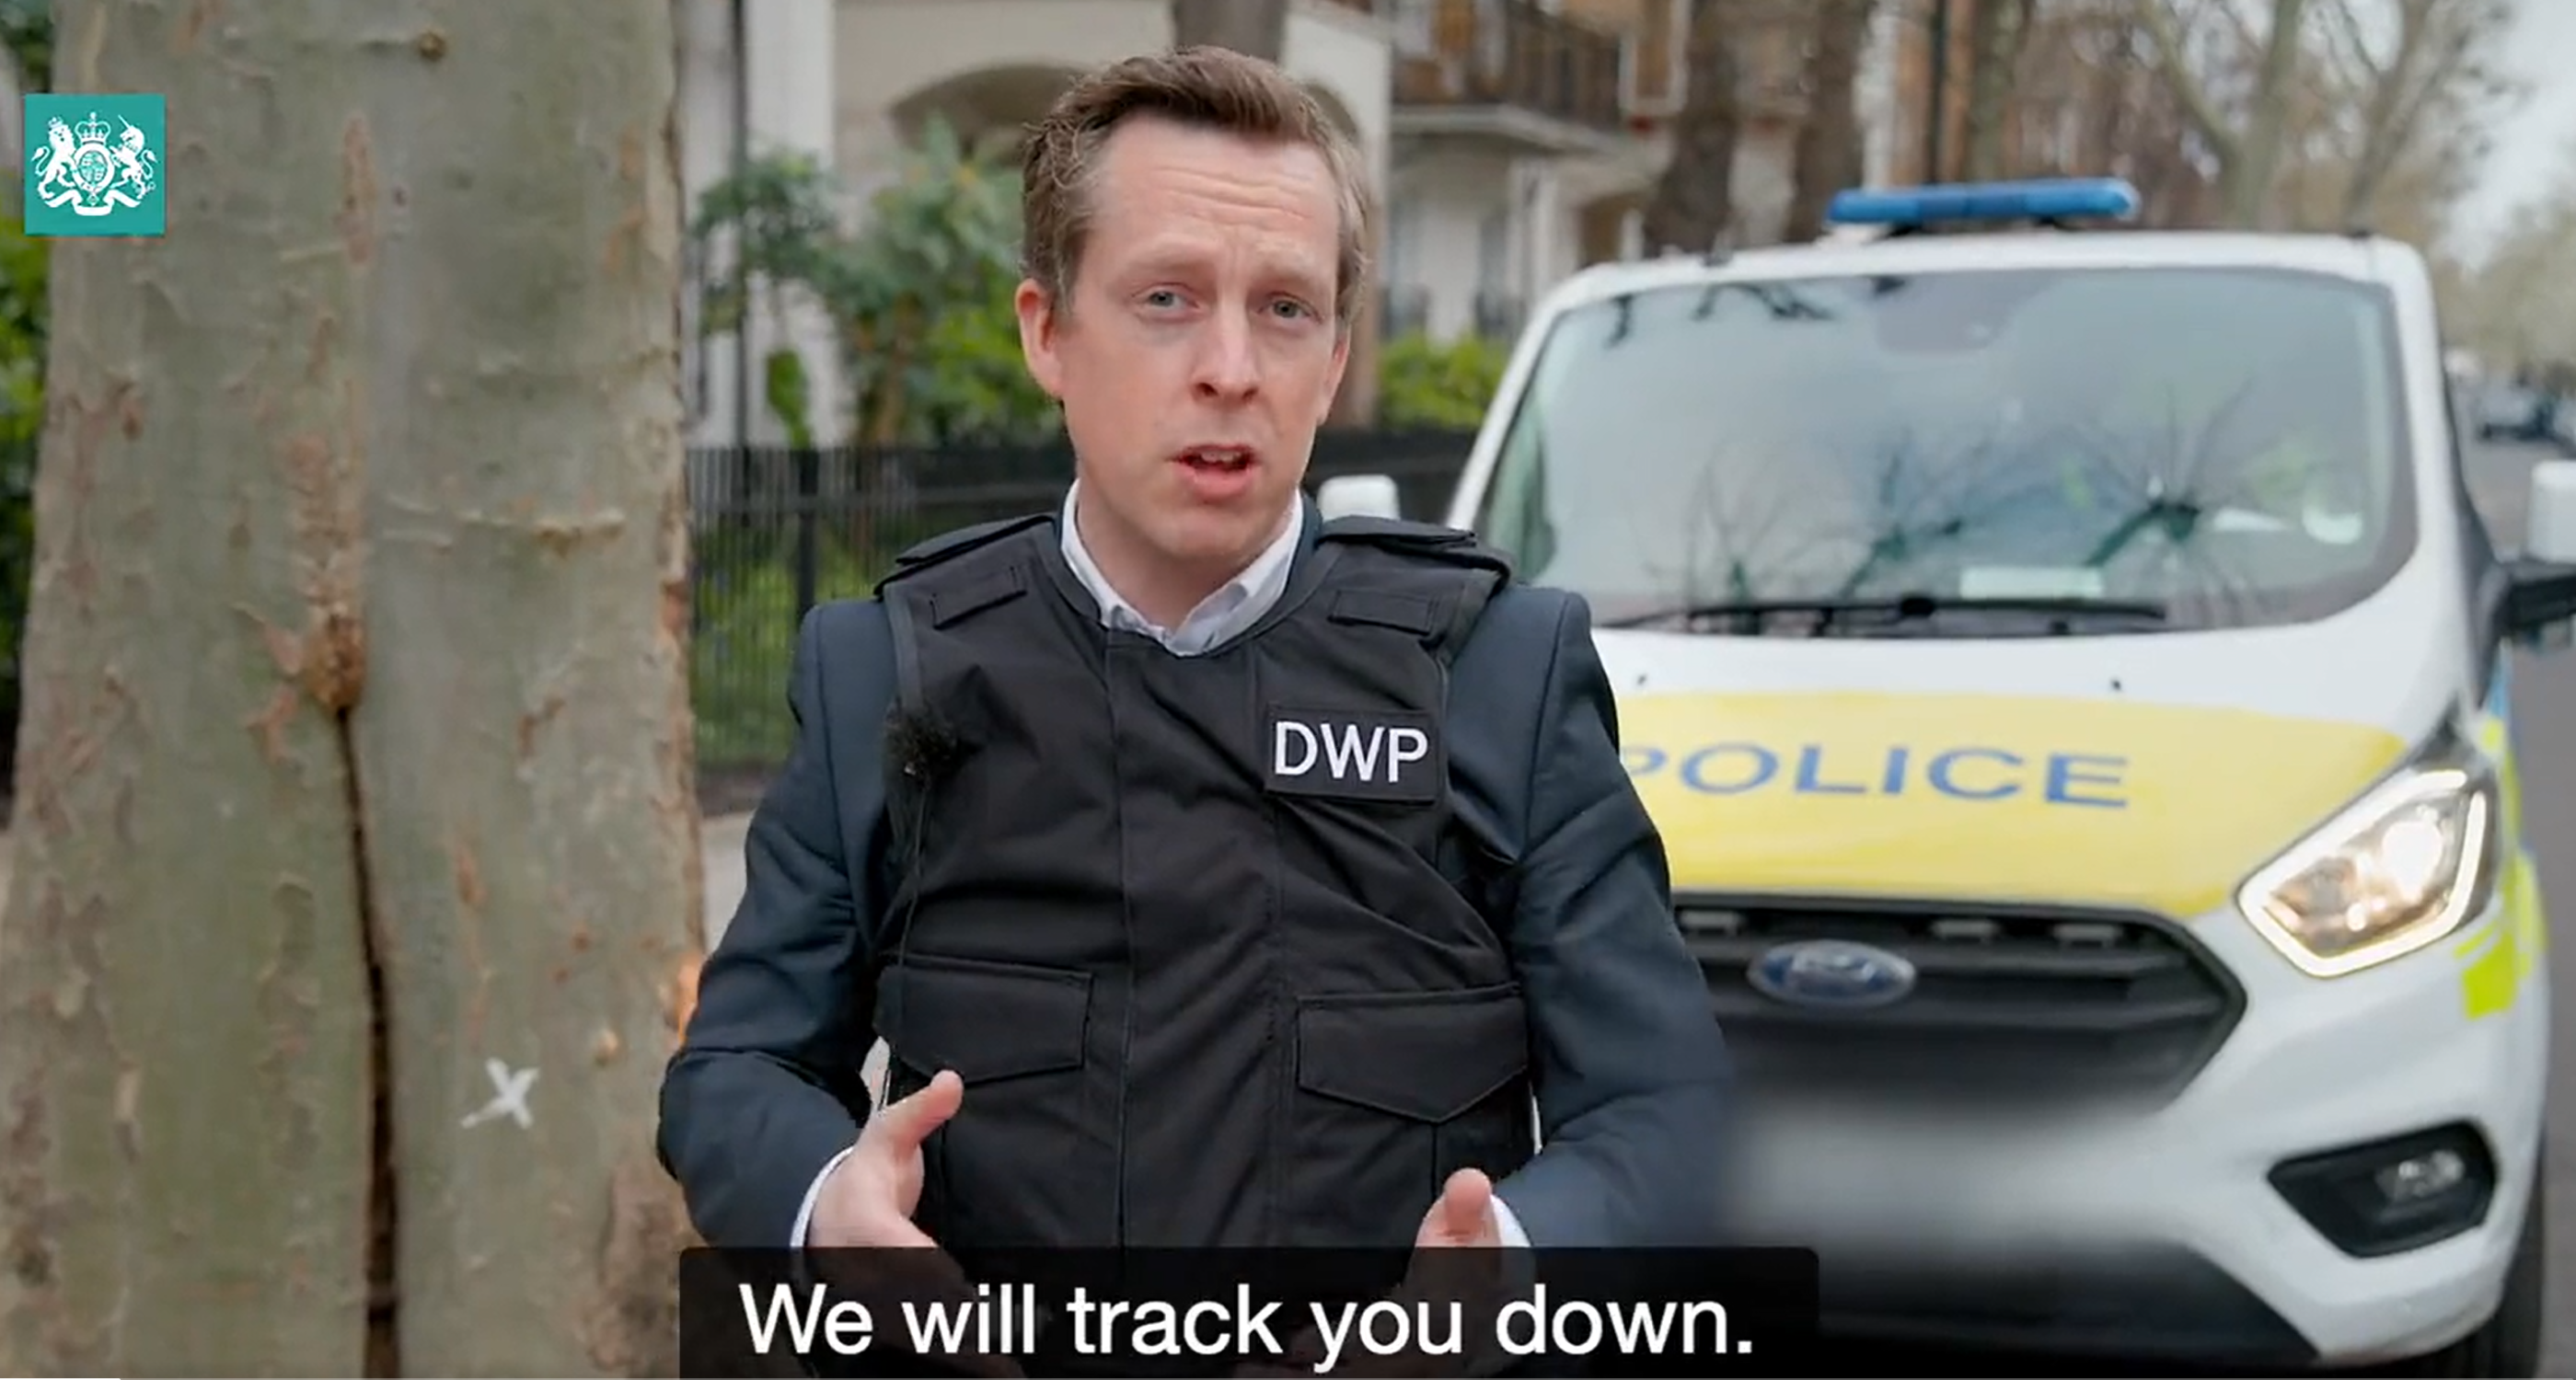 Video still: Tom Pursglove from Department for Work and Pensions saying "We will track you down".